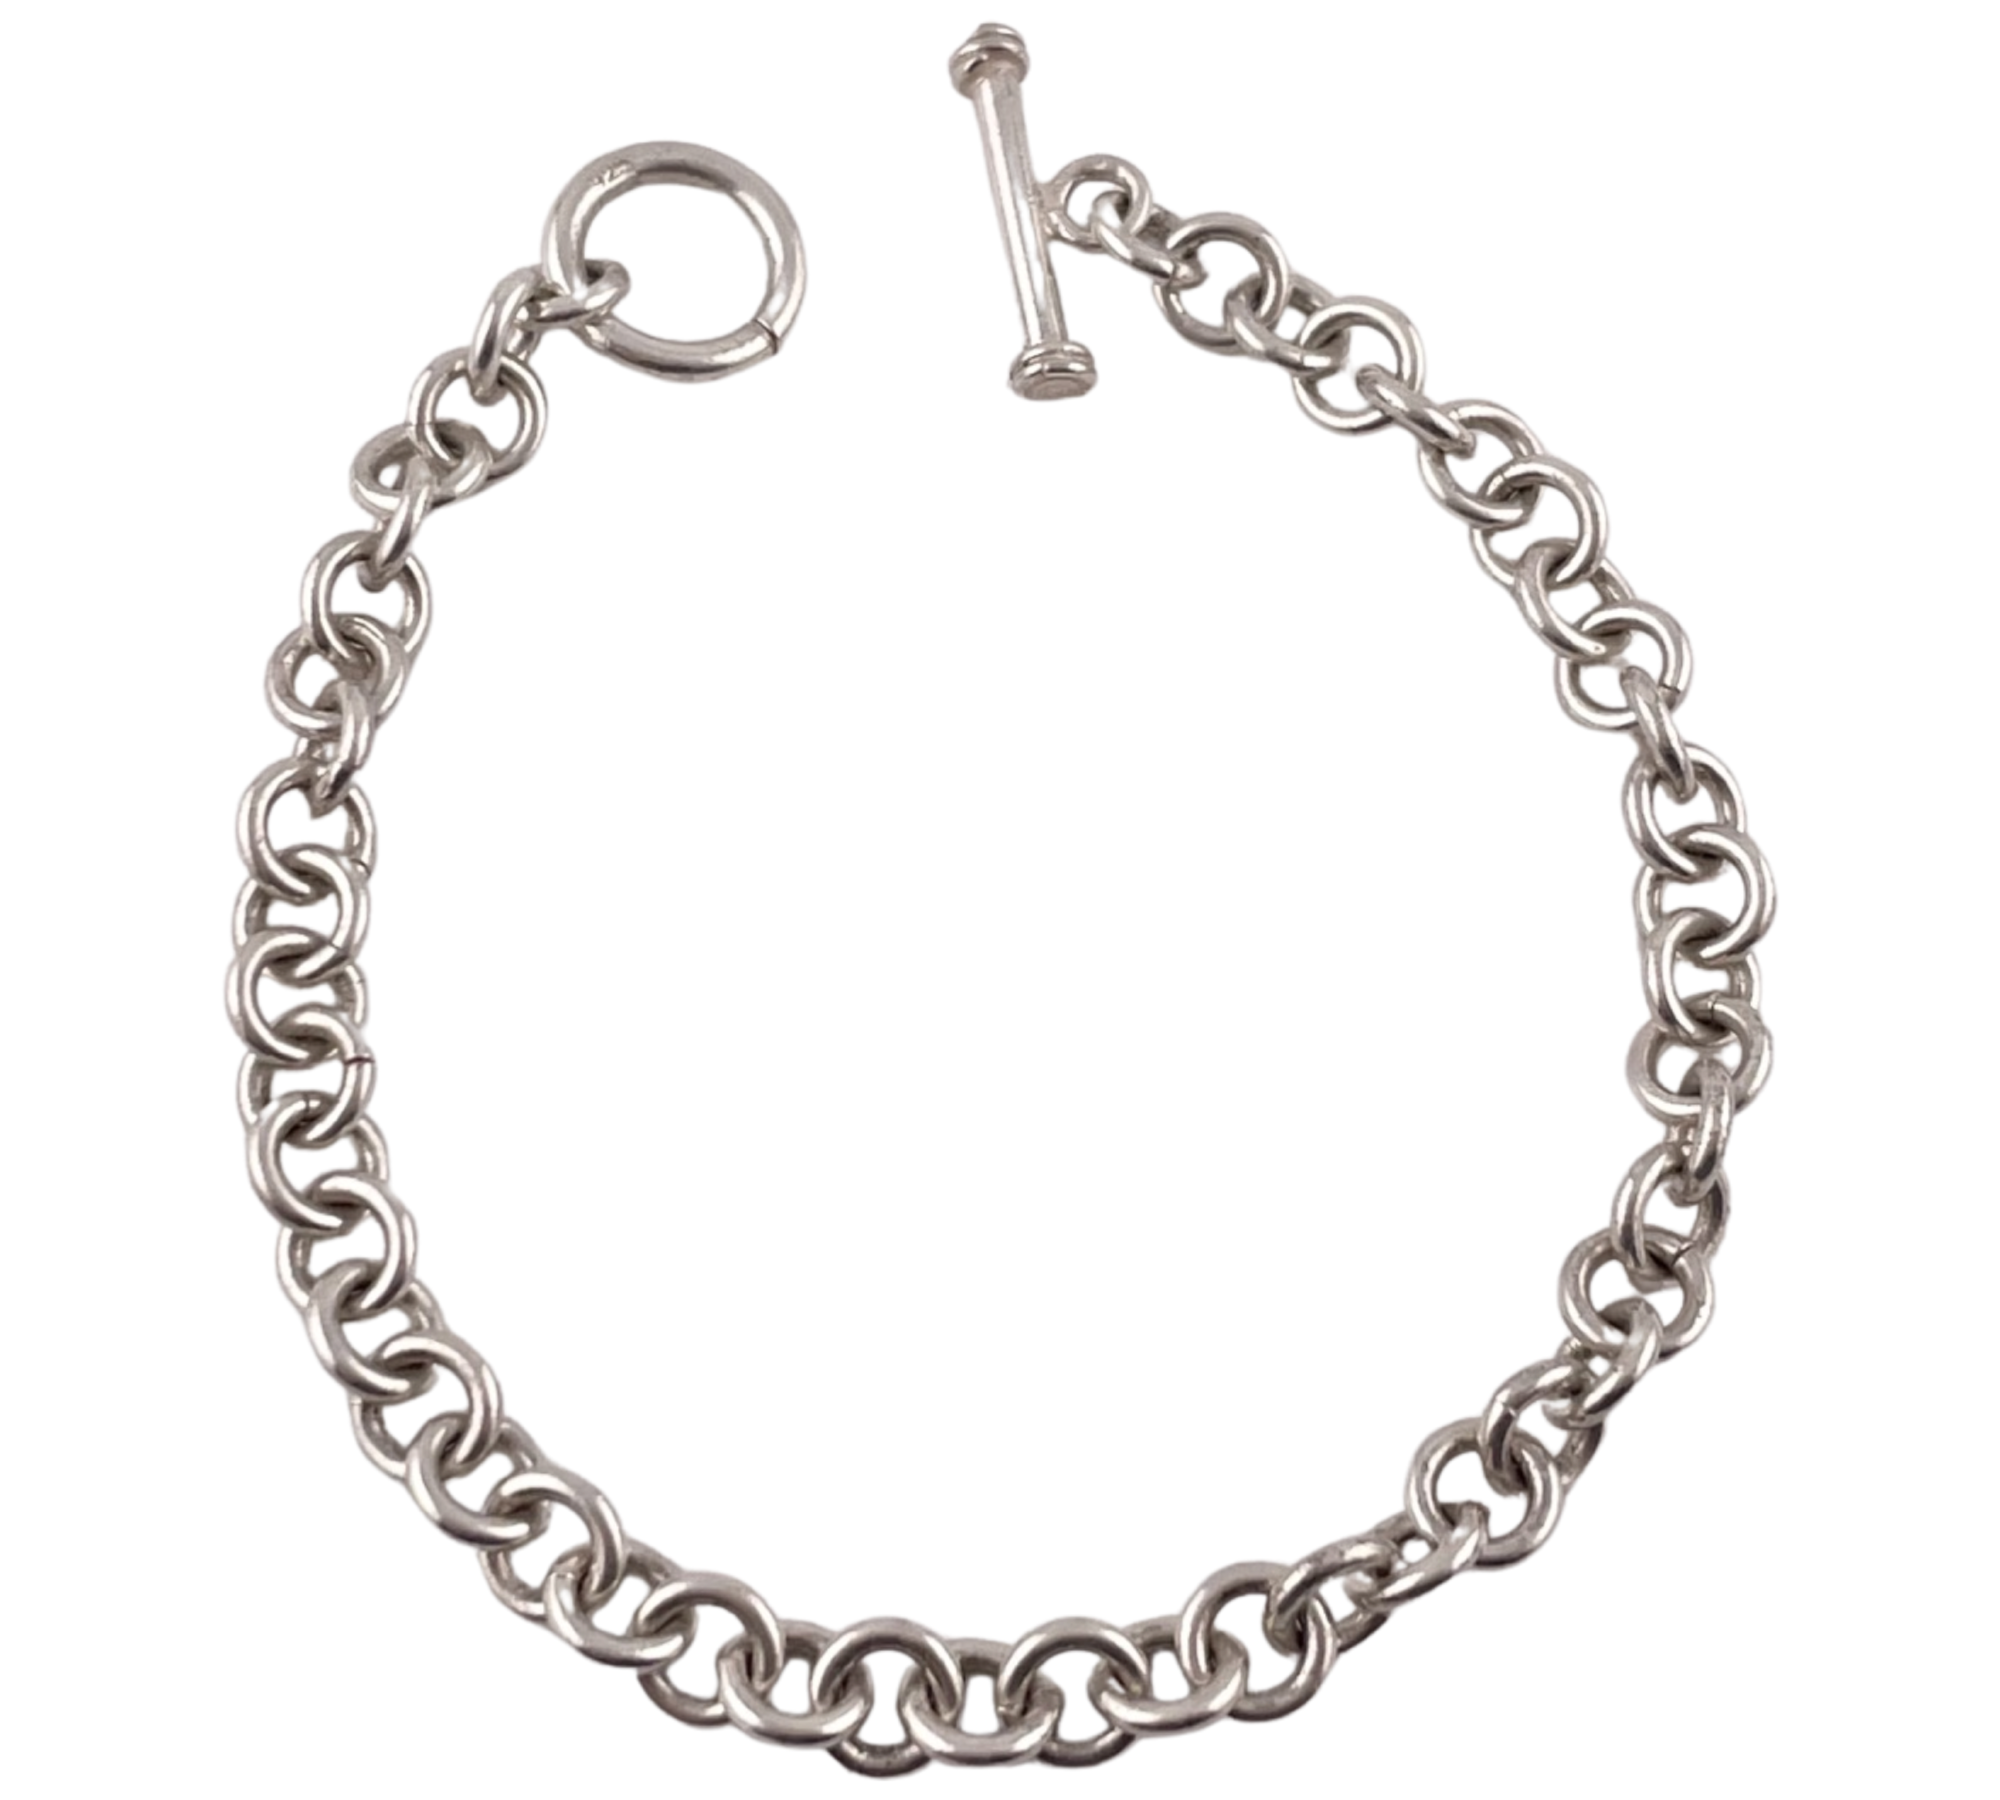 sterling silver 7 1/2" circle chain link toggle clasp bracelet